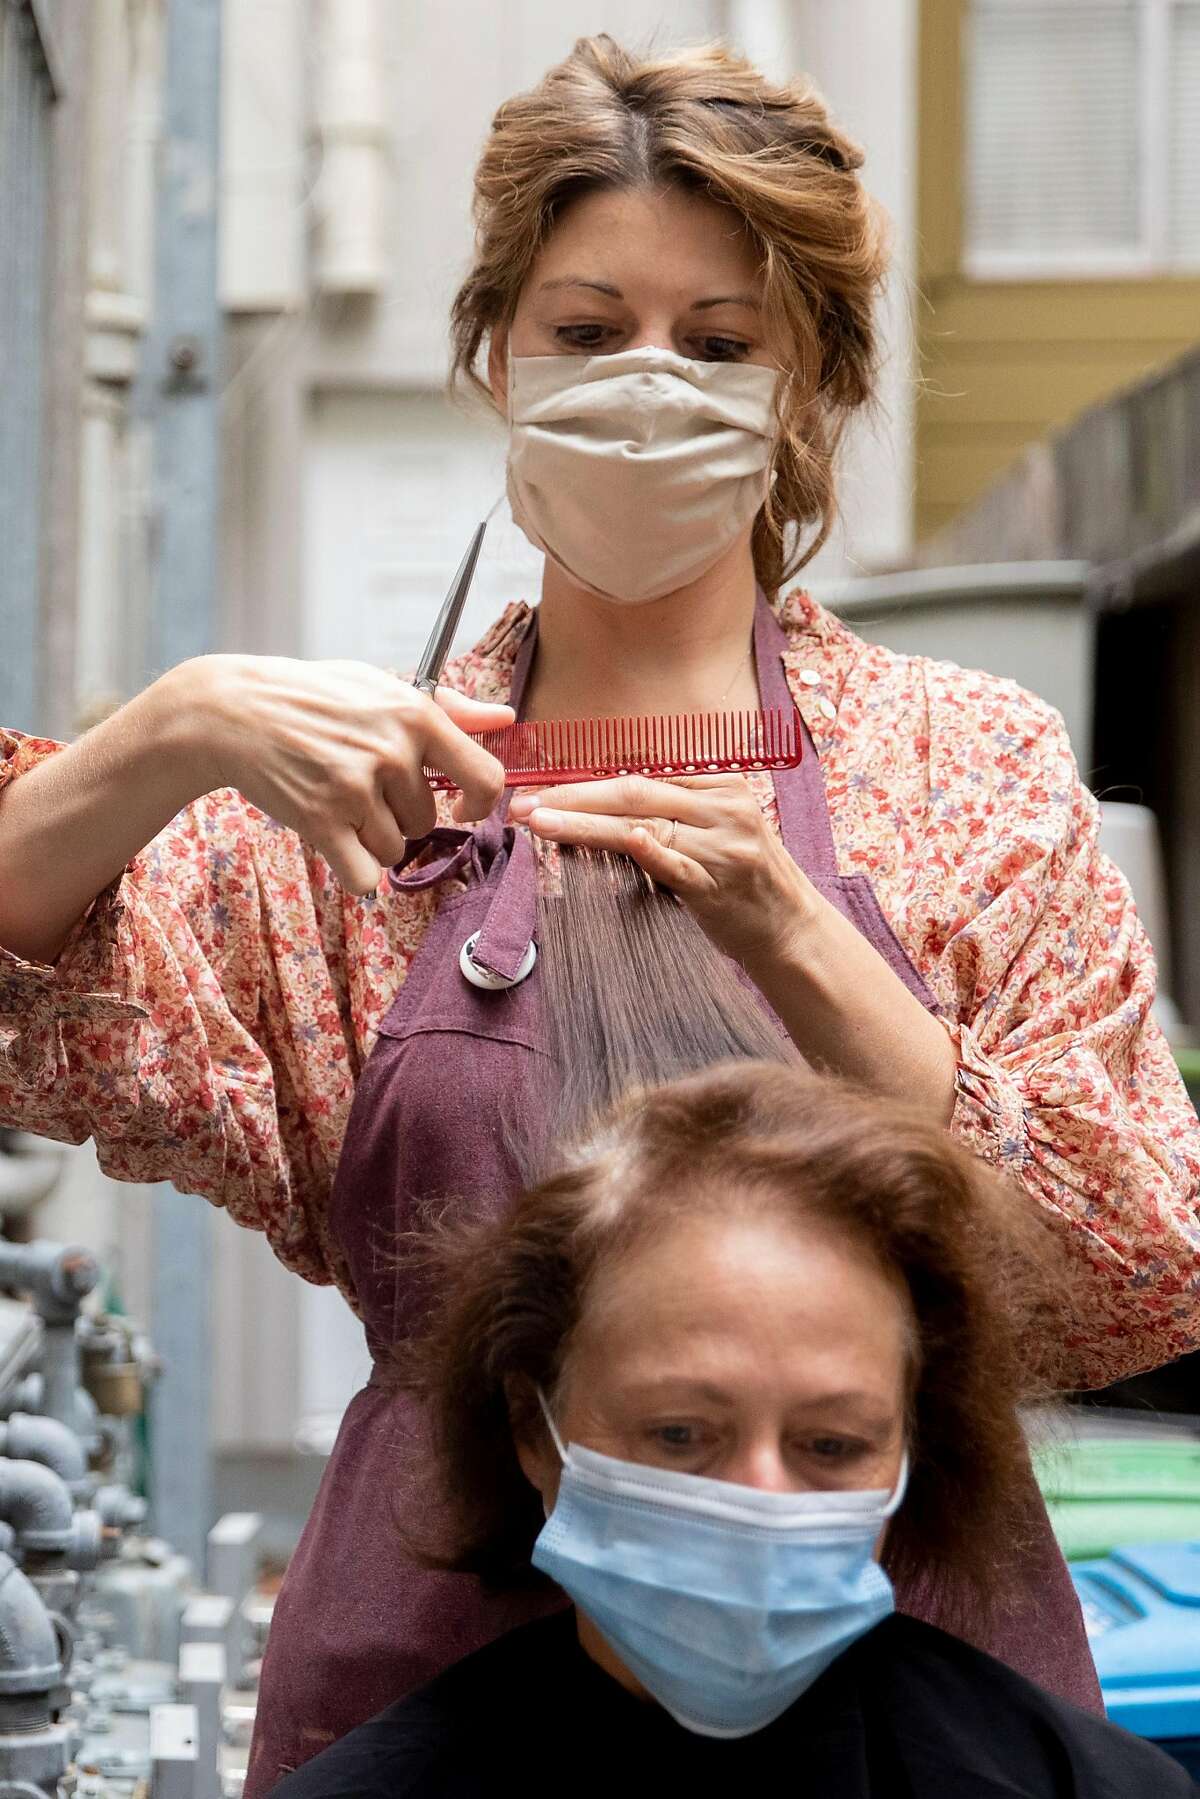 Plum Organic Beauty owner Danica Winters cut Martha Gregg's hair in the outdoor patio of her salon in San Francisco, Calif. Tuesday, September 1, 2020. Massage, hair and nail salons in San Francisco are permitted to open outdoors starting Tuesday, September 1 for the first time since COVID-19 shelter-in-place orders shuttered most personal service businesses.